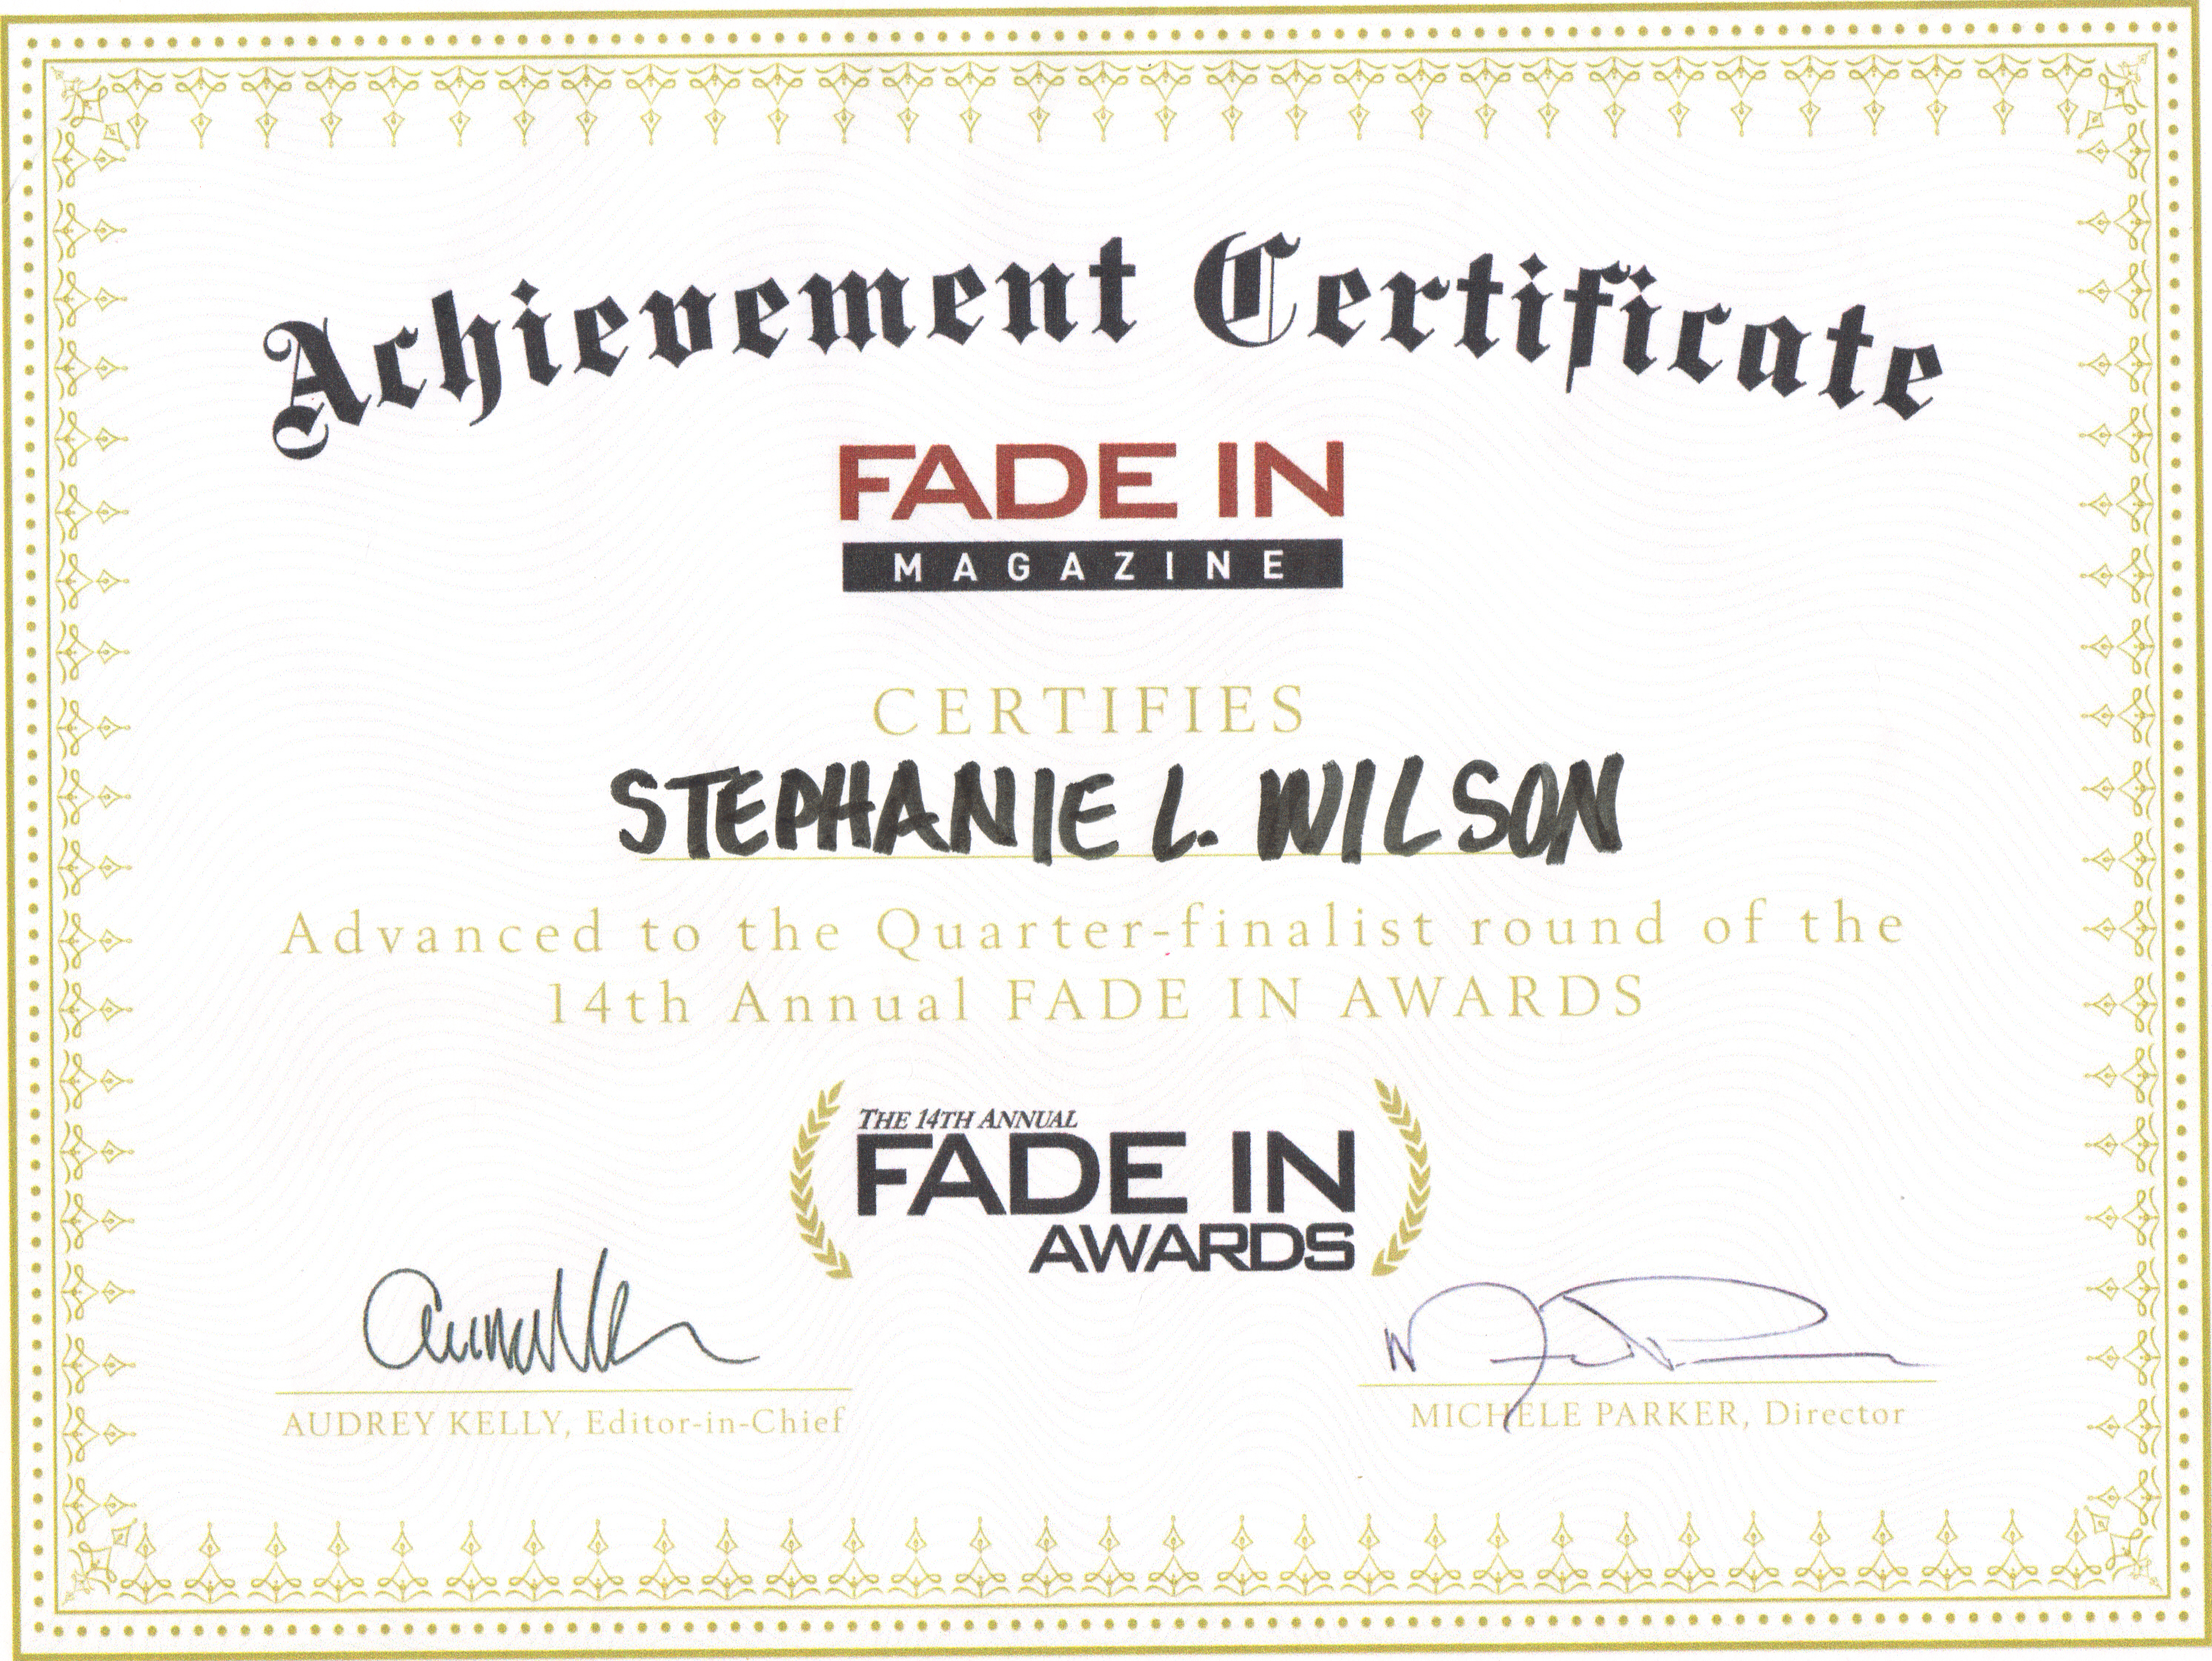 Certificate of Achievement placing quarter finalist in Fade In Awards for the screenplay version of 